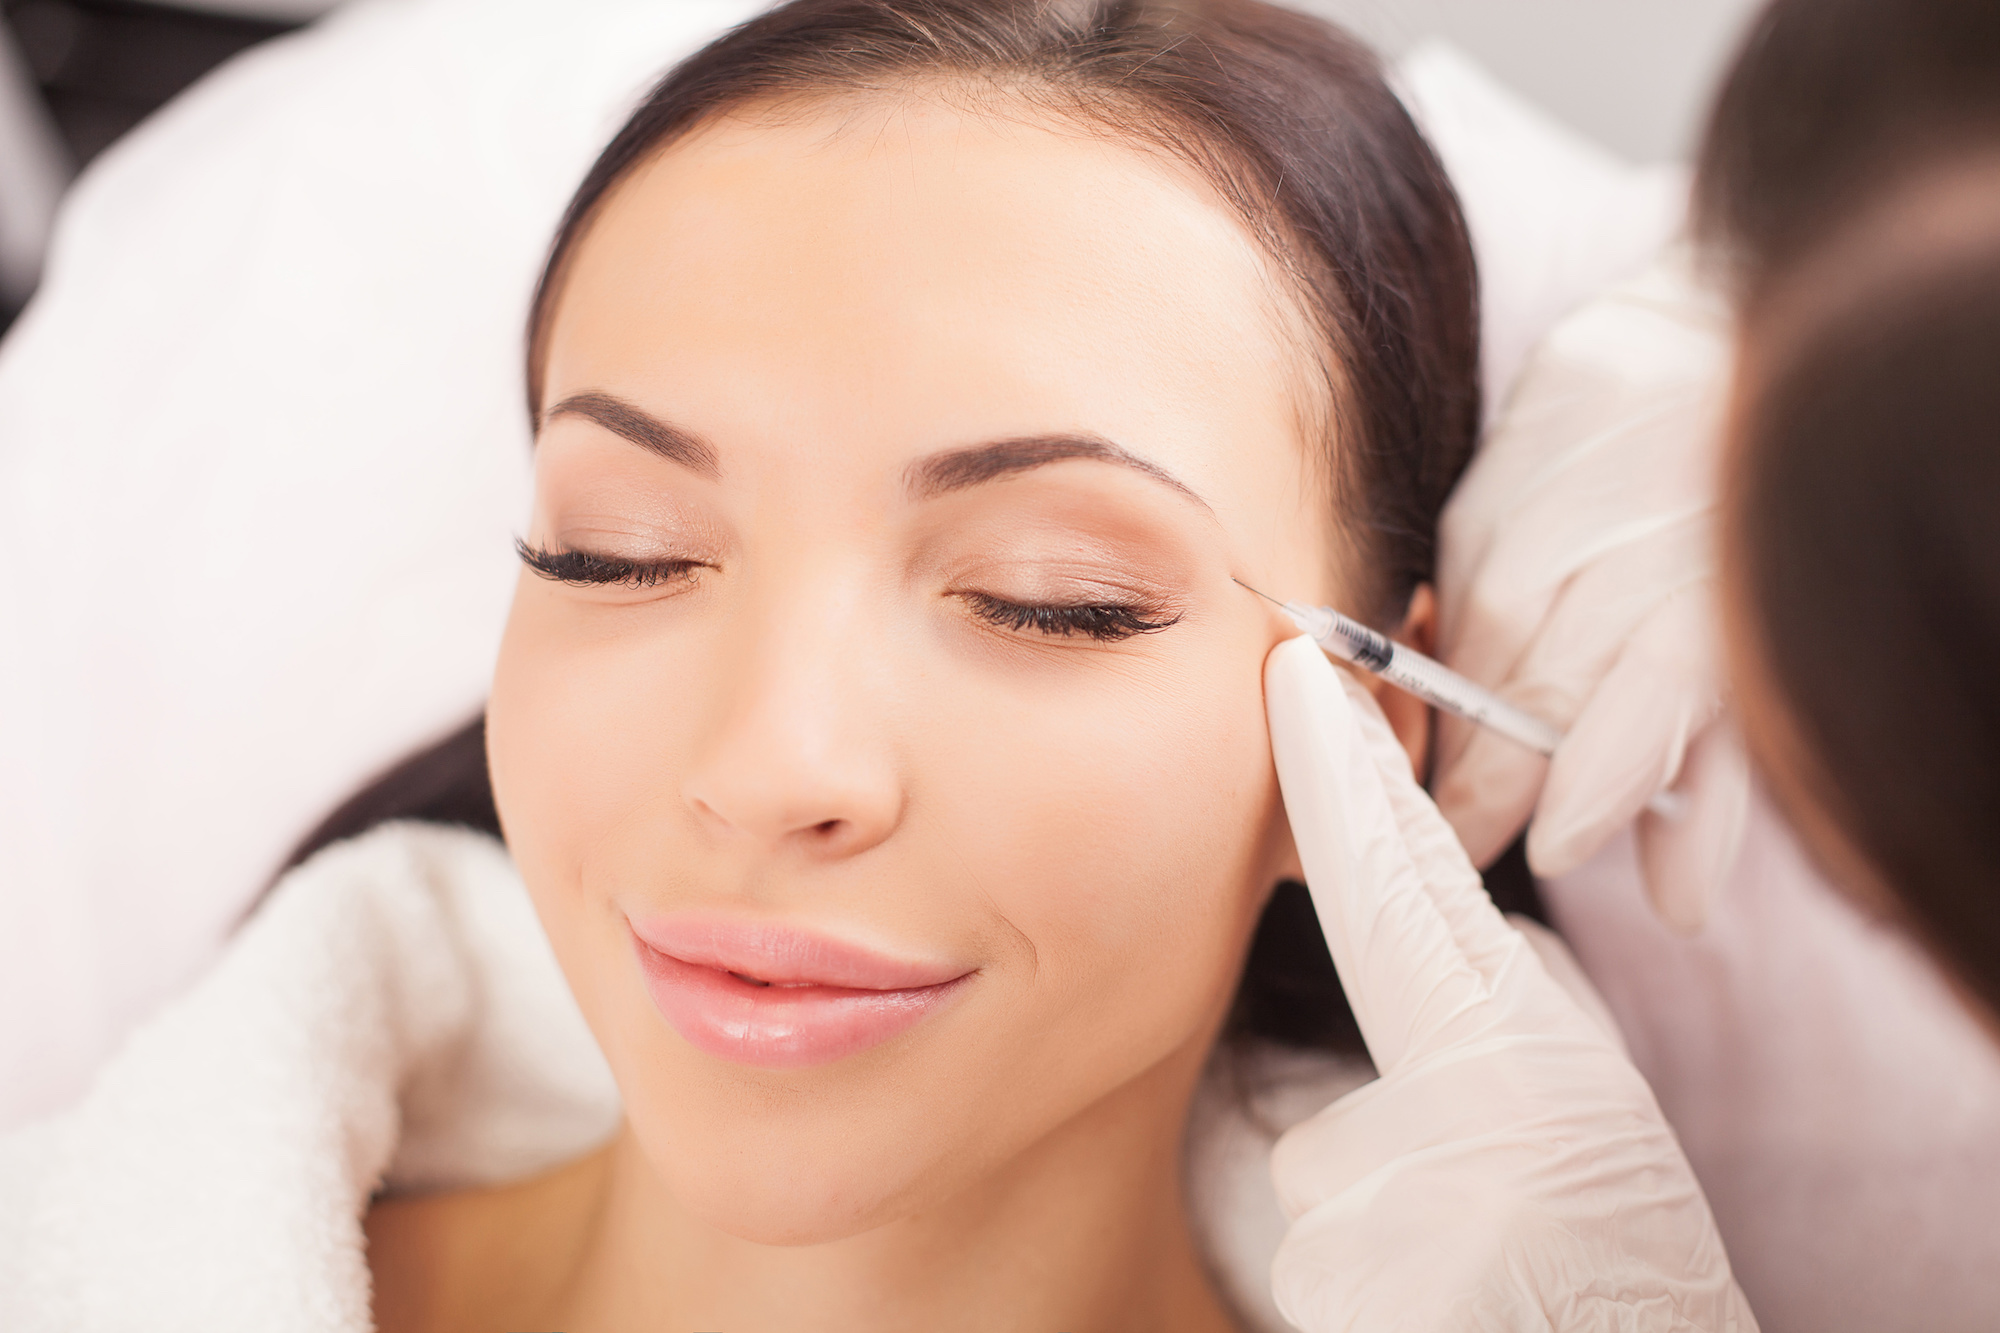 What Is Botox & How Is It Used?